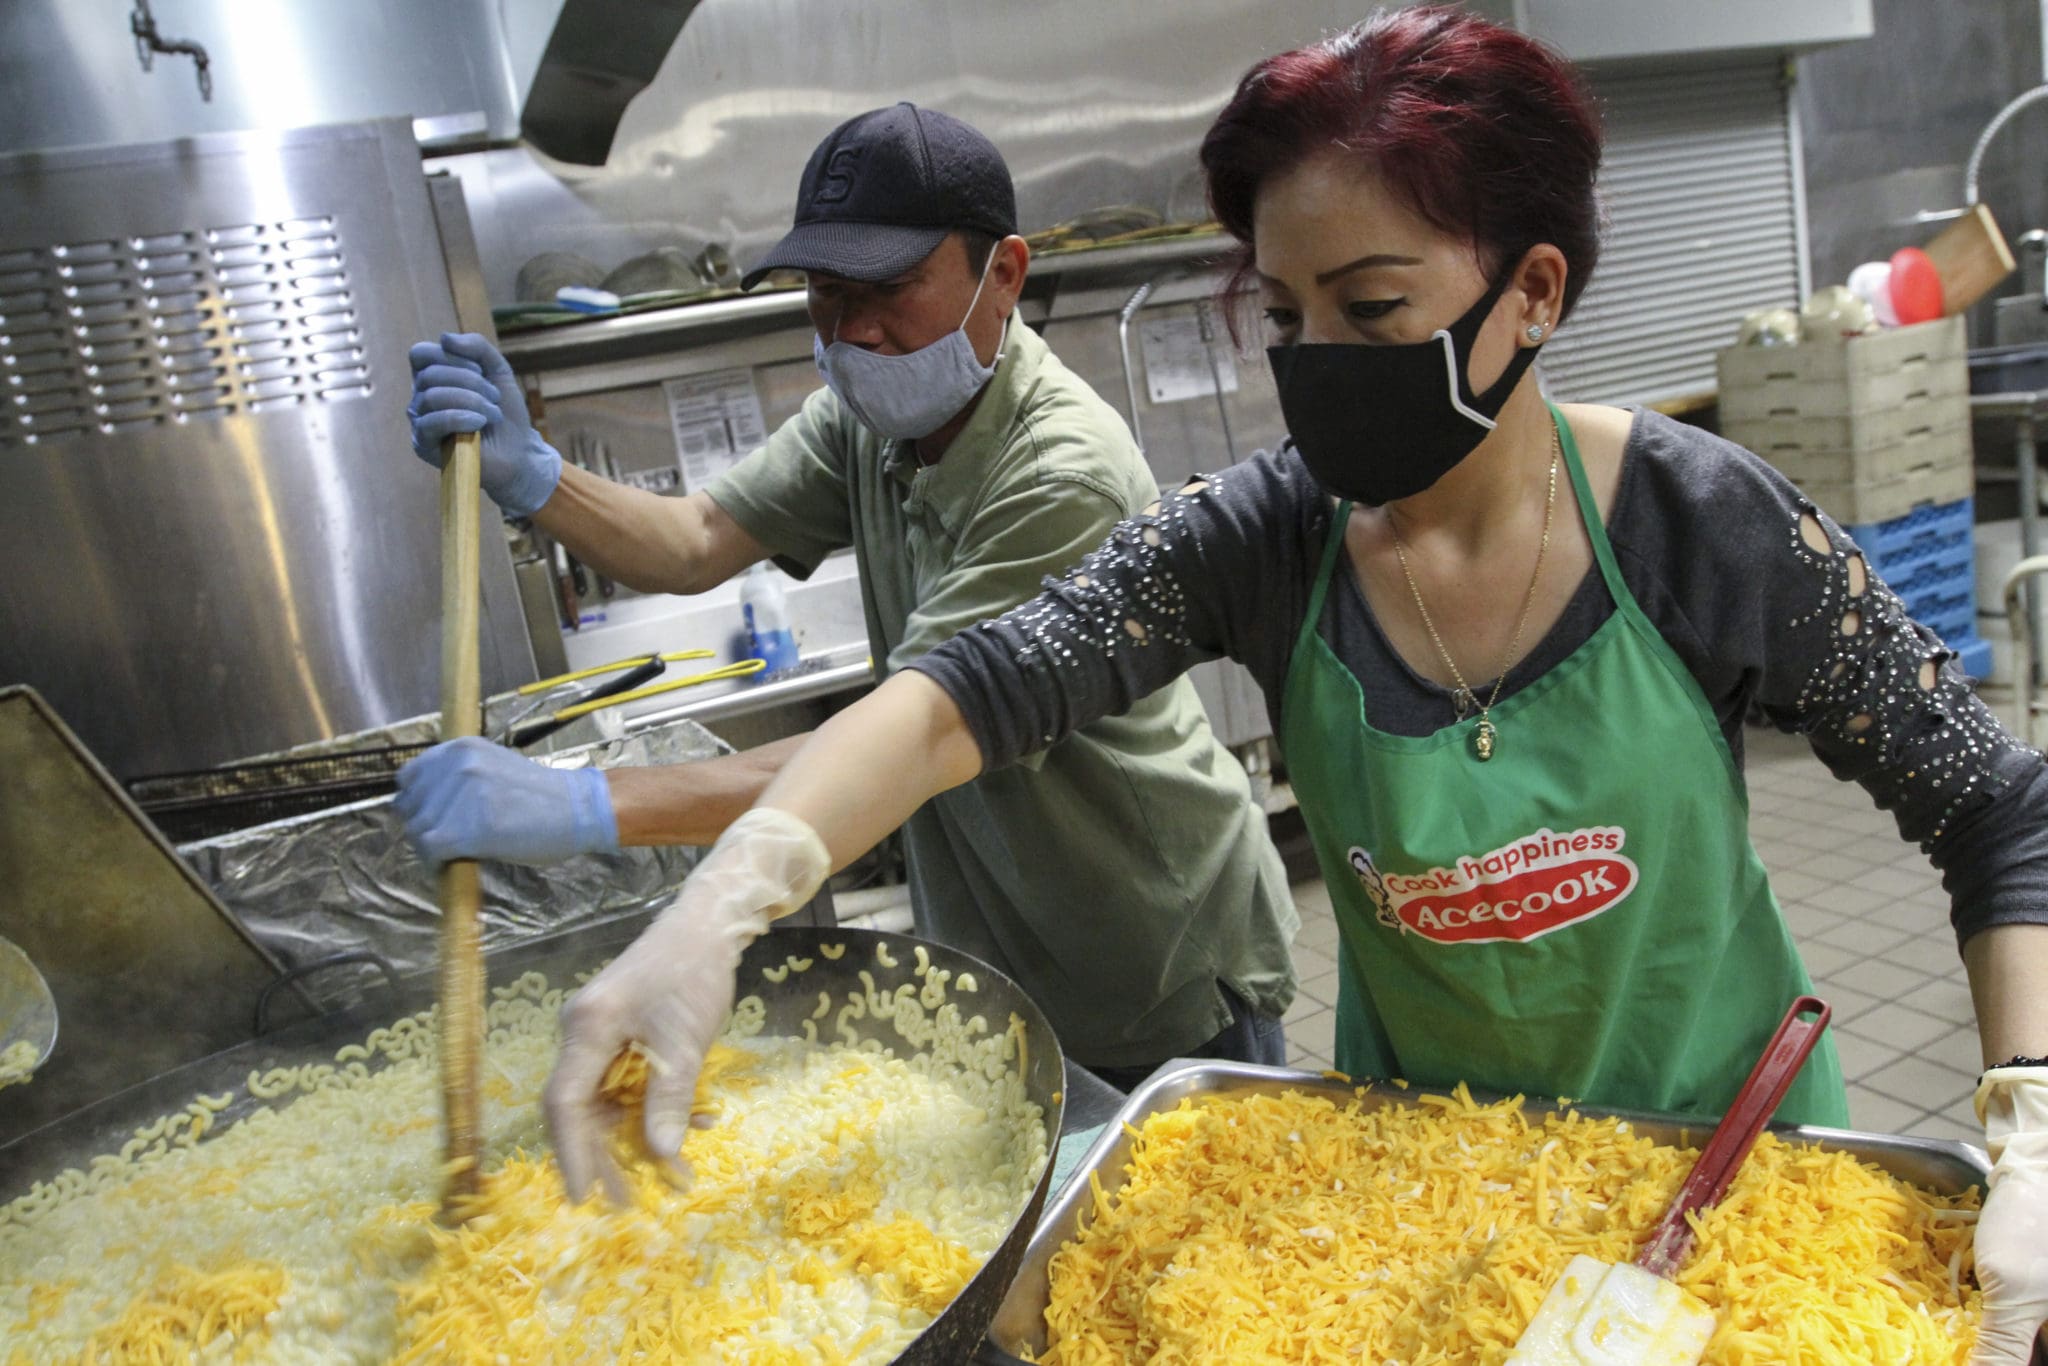 As Hoang Nguyen, left, stirs the noodles, Tam Ho sprinkles shredded cheese into the large pot. On Tuesdays, the main dish on the menu is either macaroni and cheese or spaghetti. Photo By Michael Alexander